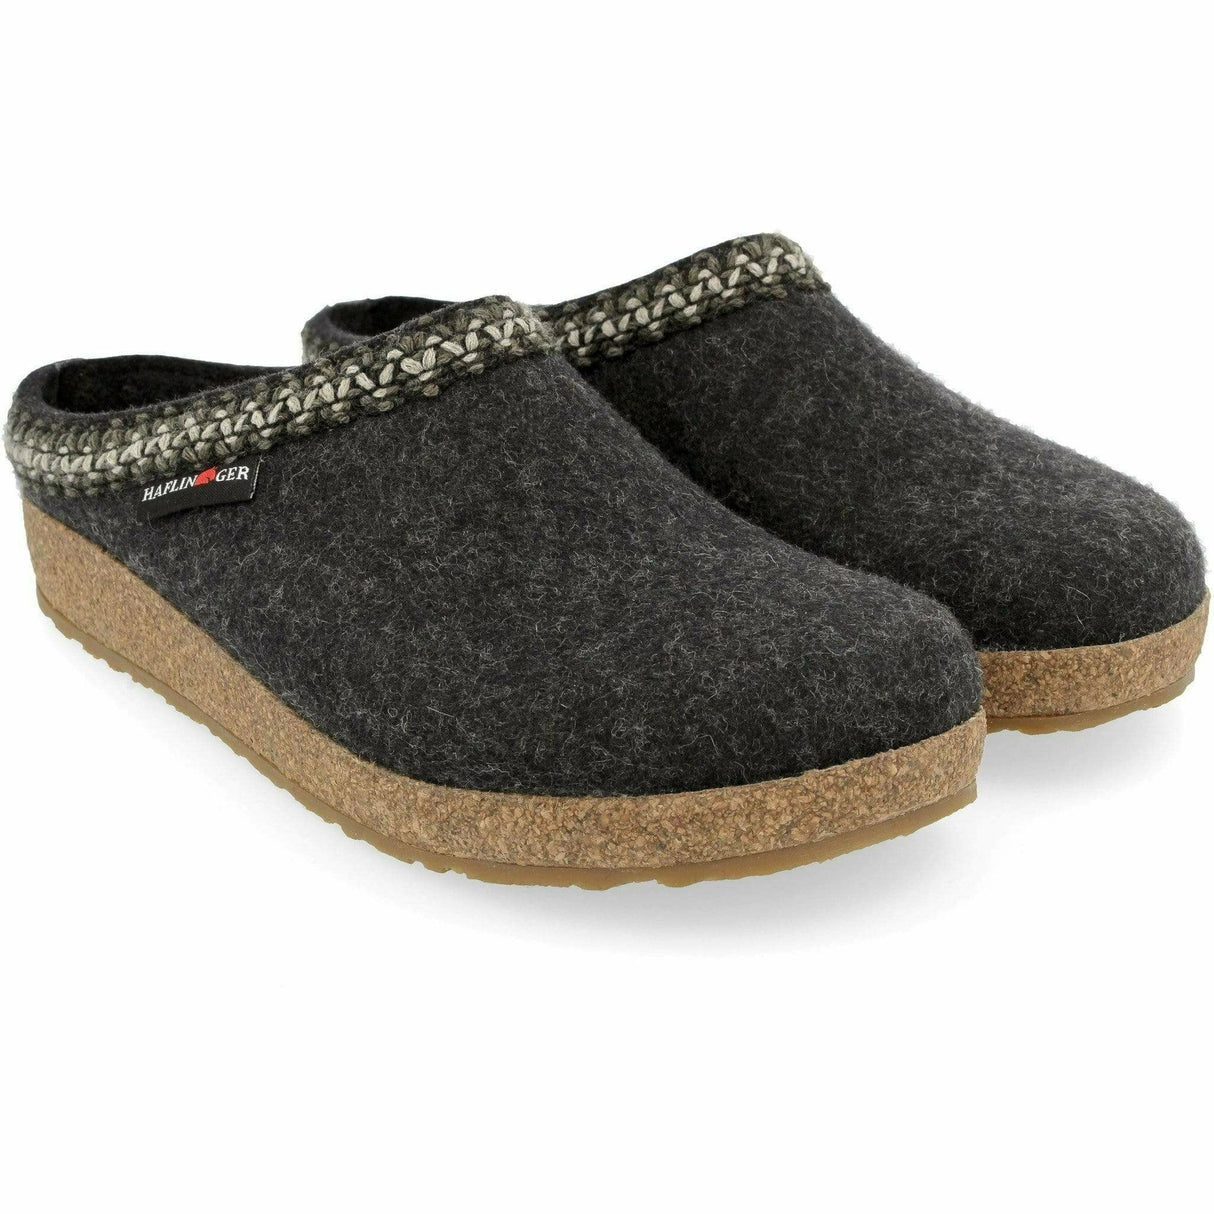 Haflinger Zig Zag Grizzly Wool Clogs  -  36 / Charcoal/Graphite